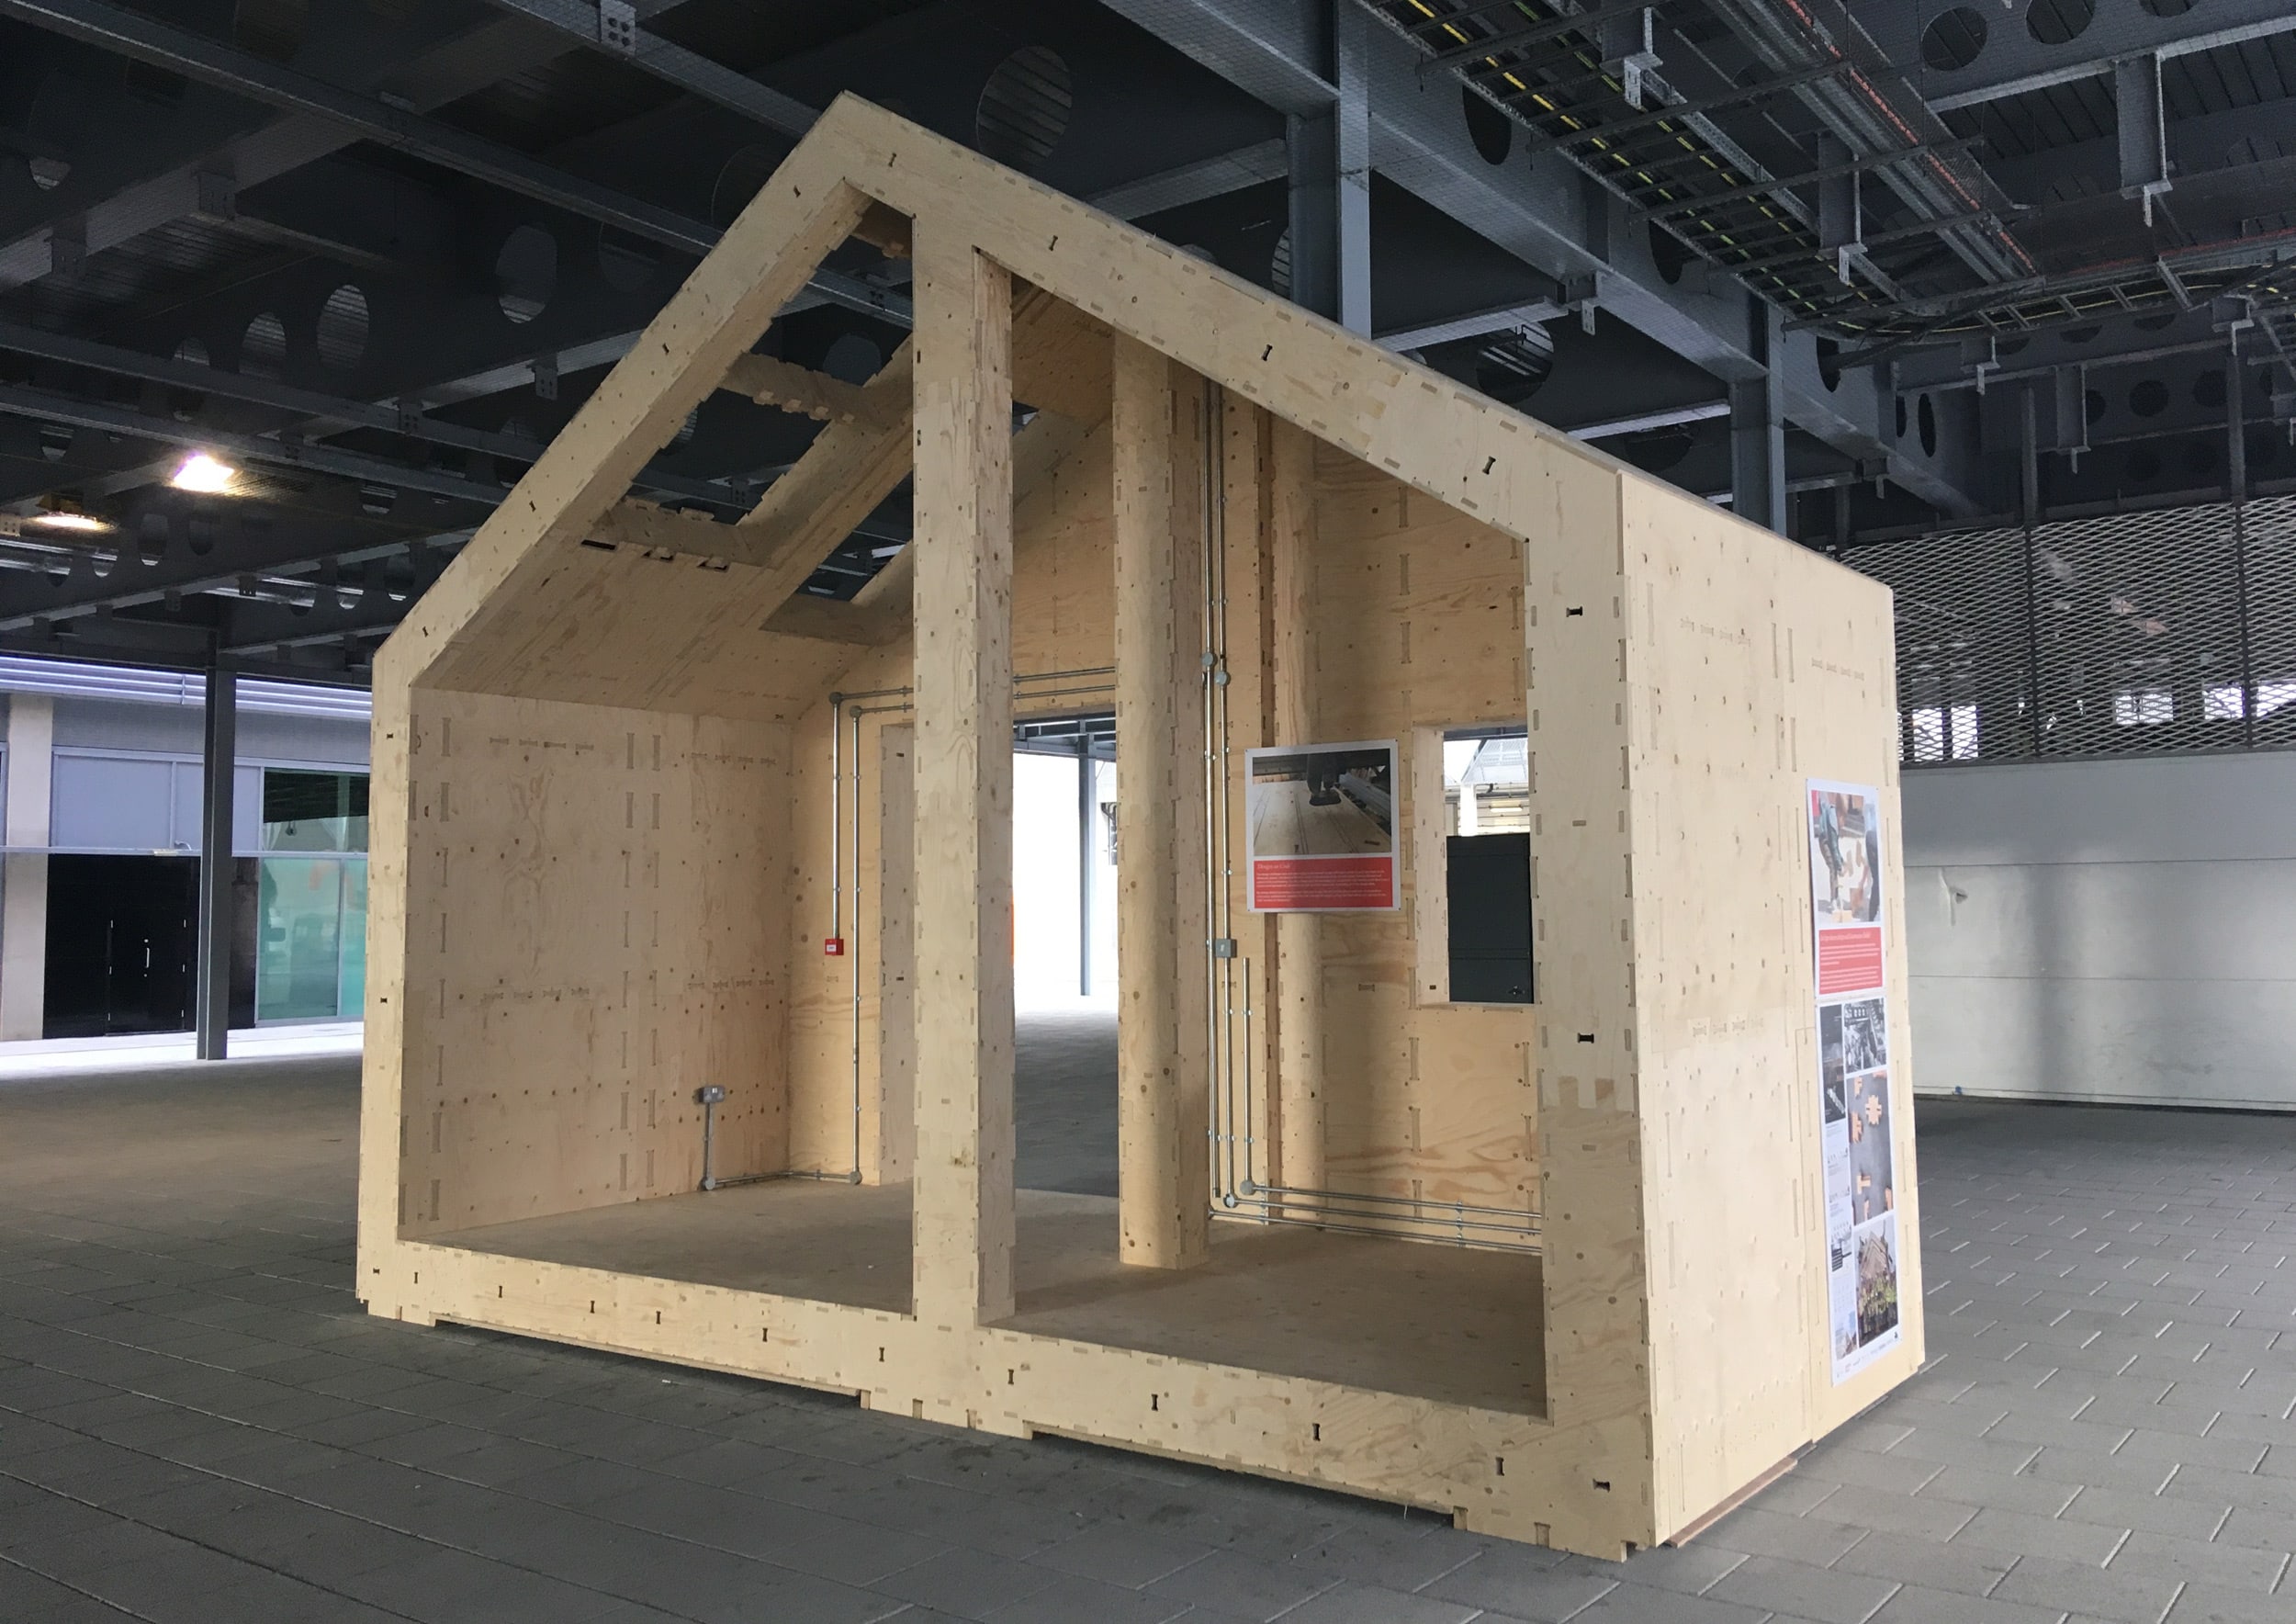 Ben Whitfield, Technical Director at AWA, about his experience working on WikiHouse projects